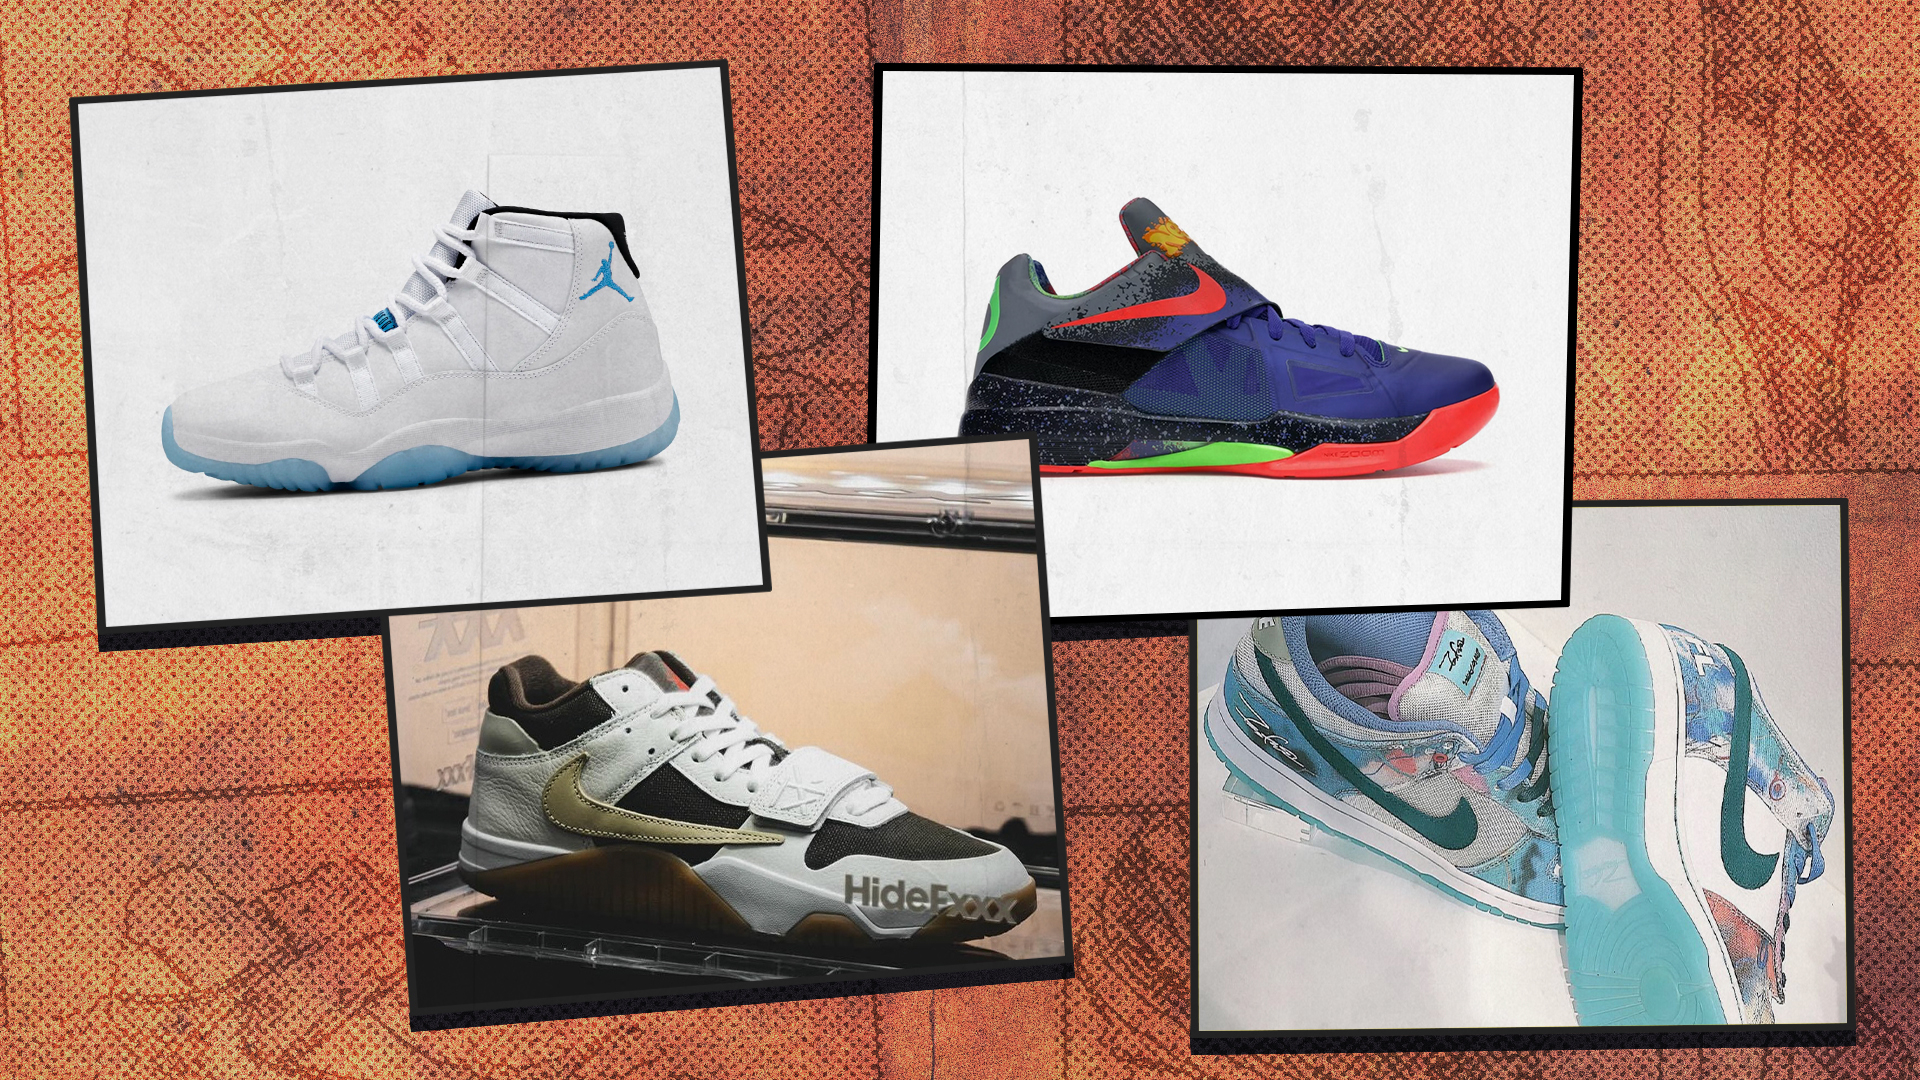 The Best Shoes of 2021: From Nike to Air Jordan to adidas - StockX News